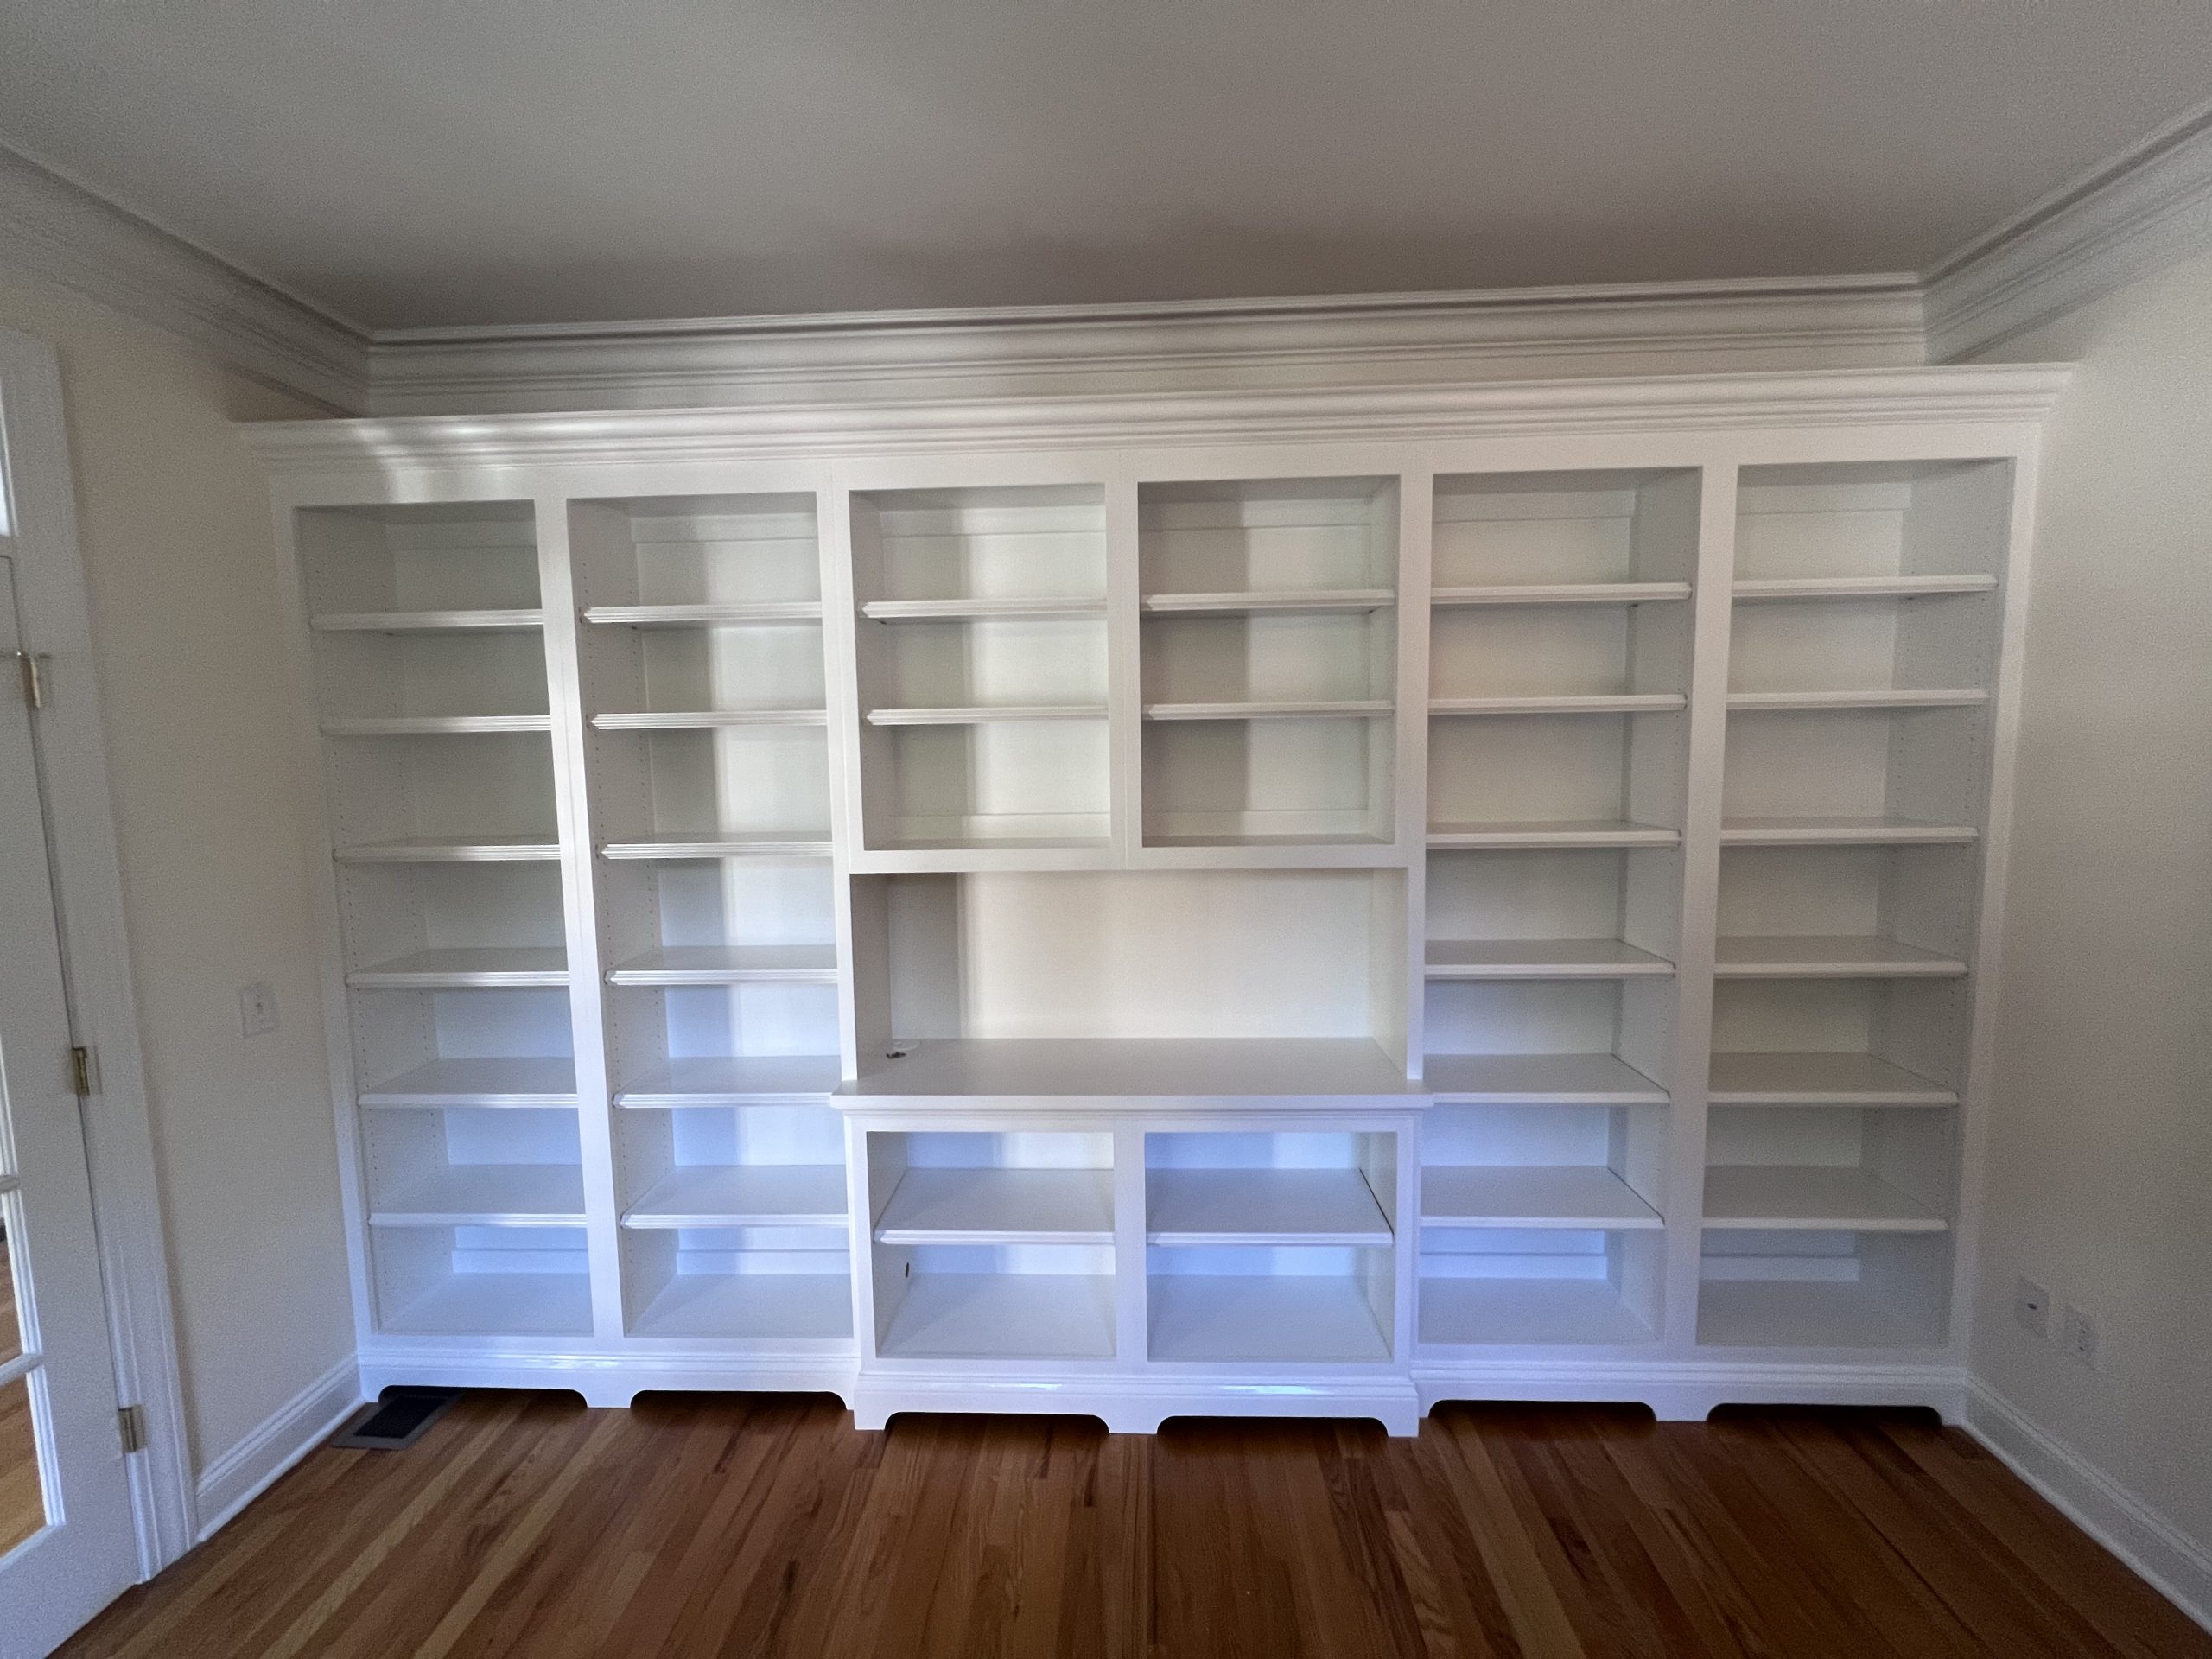 This built in was designed to help organize the clients home office with plenty of shelving an a place for their printer.